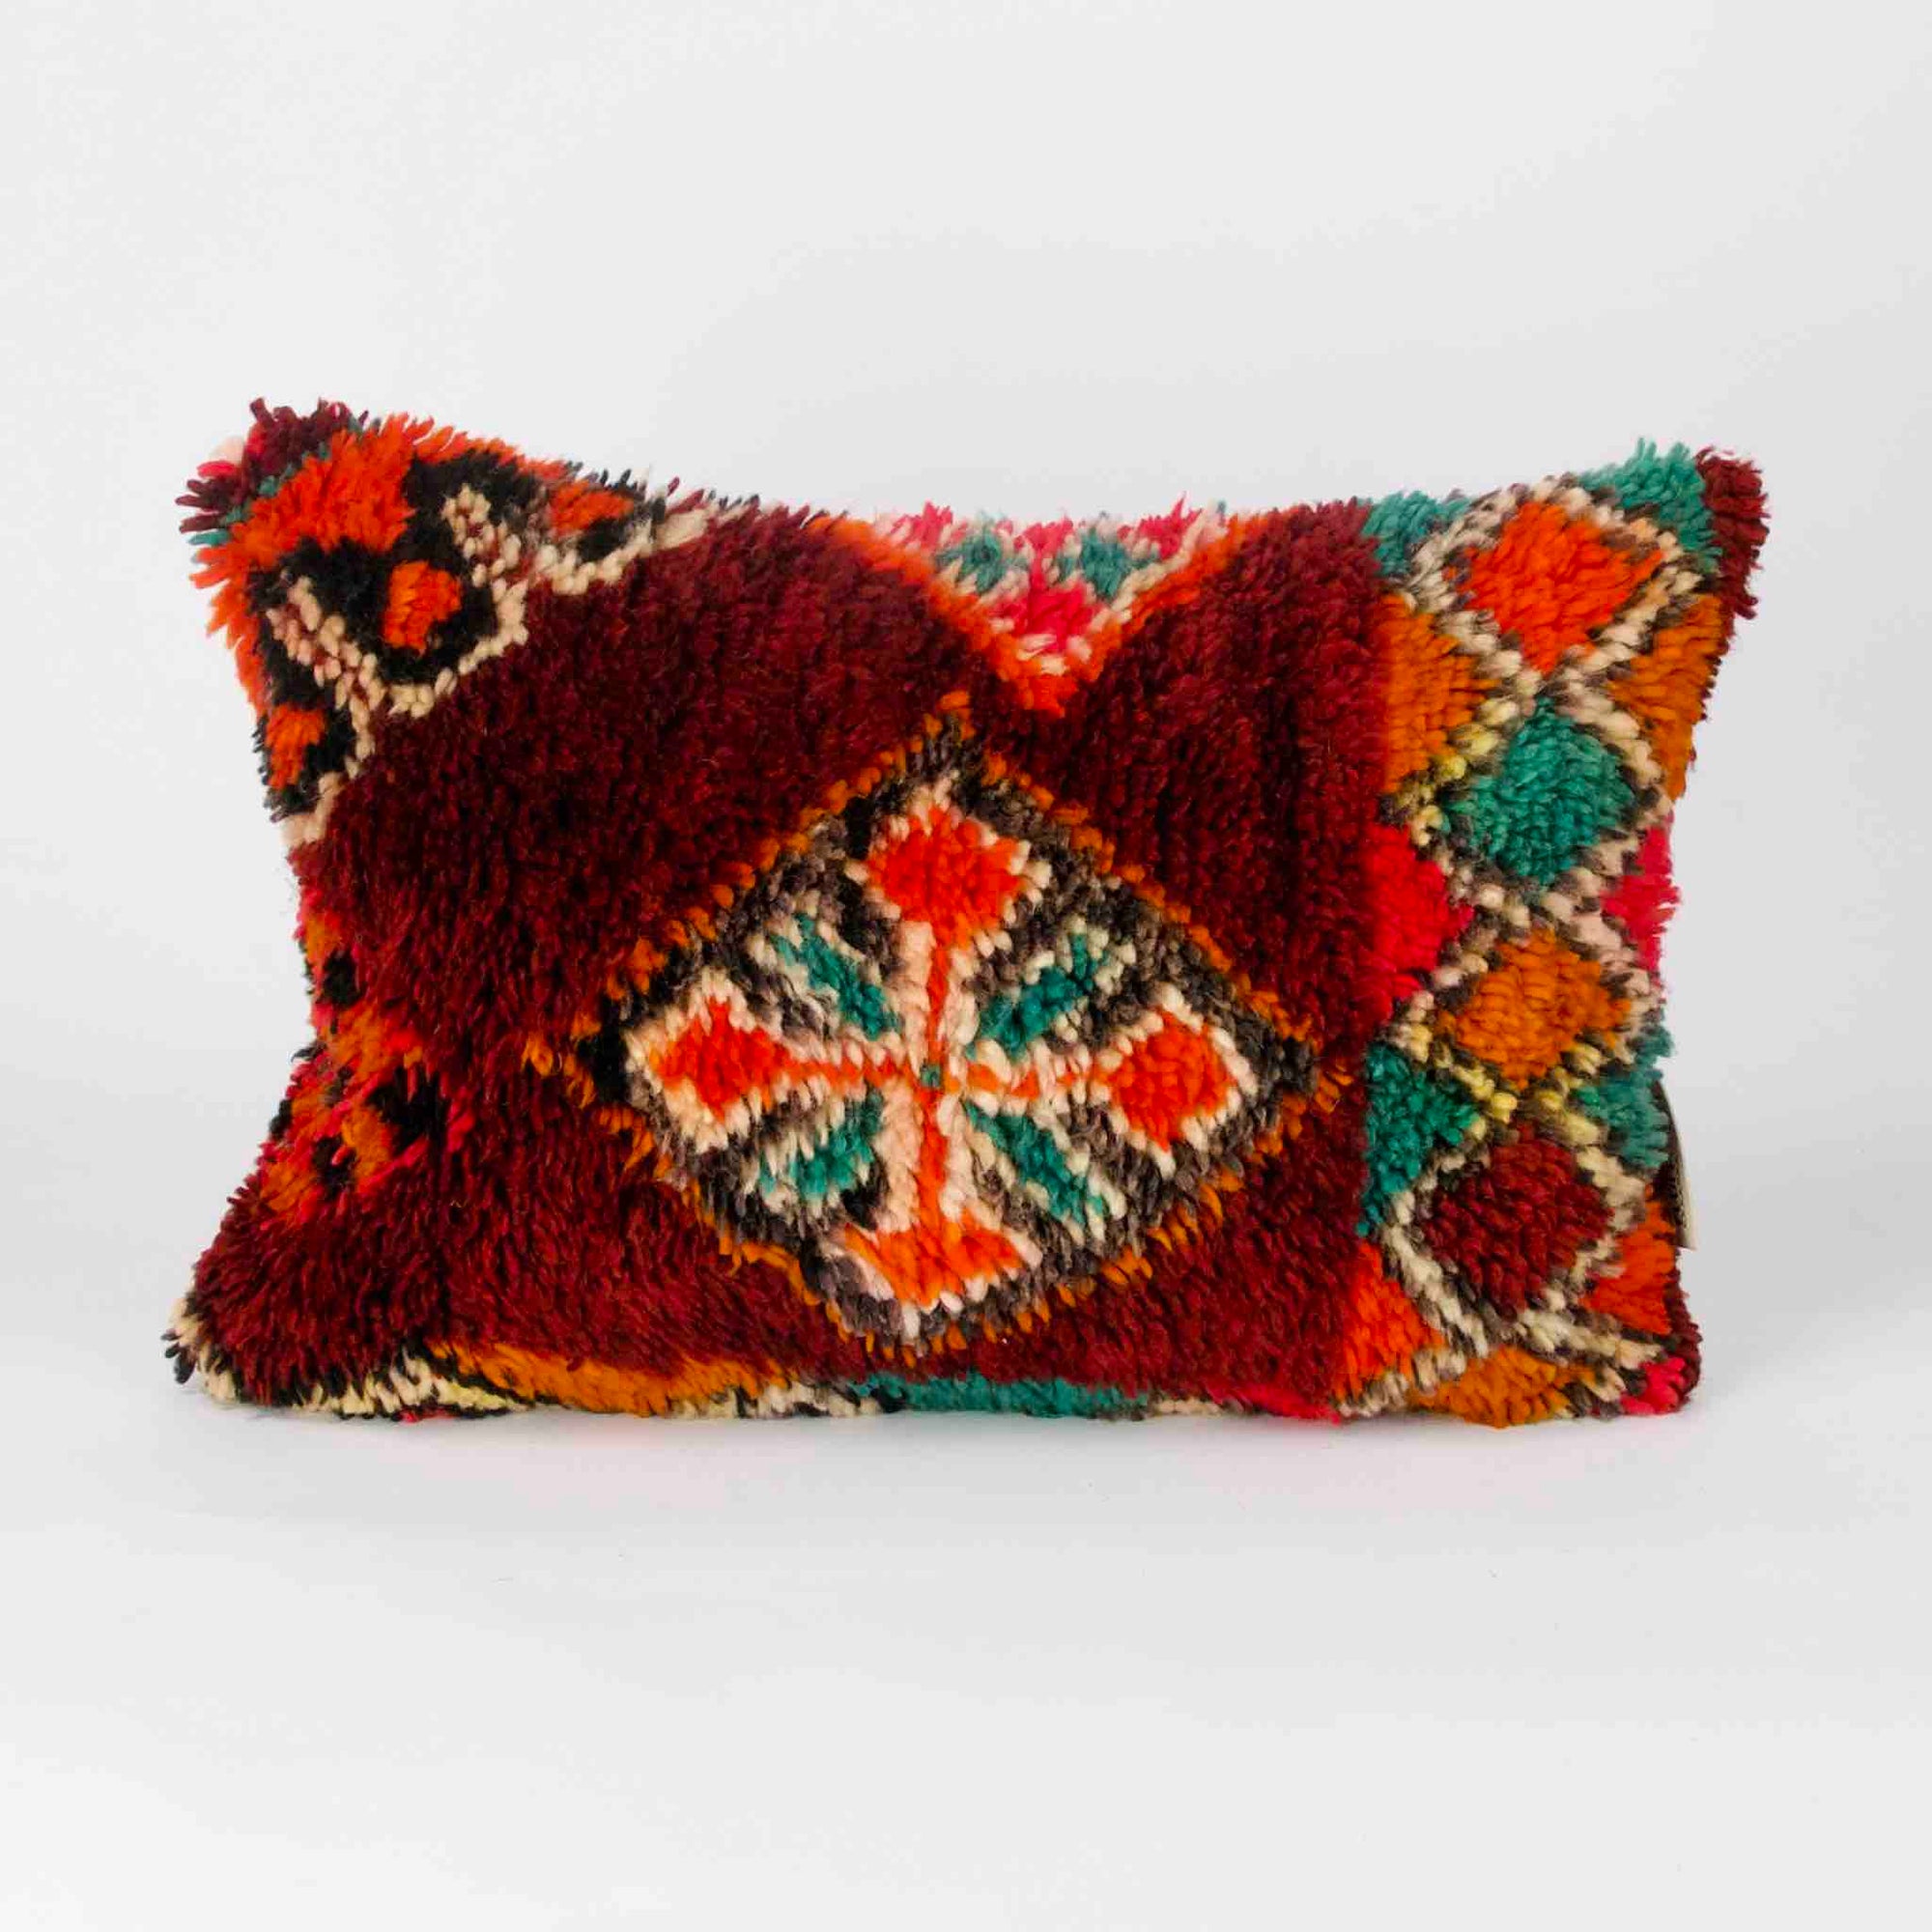 A red rectangular Berber cushion made from a vintage rug is standing in front of a white background.